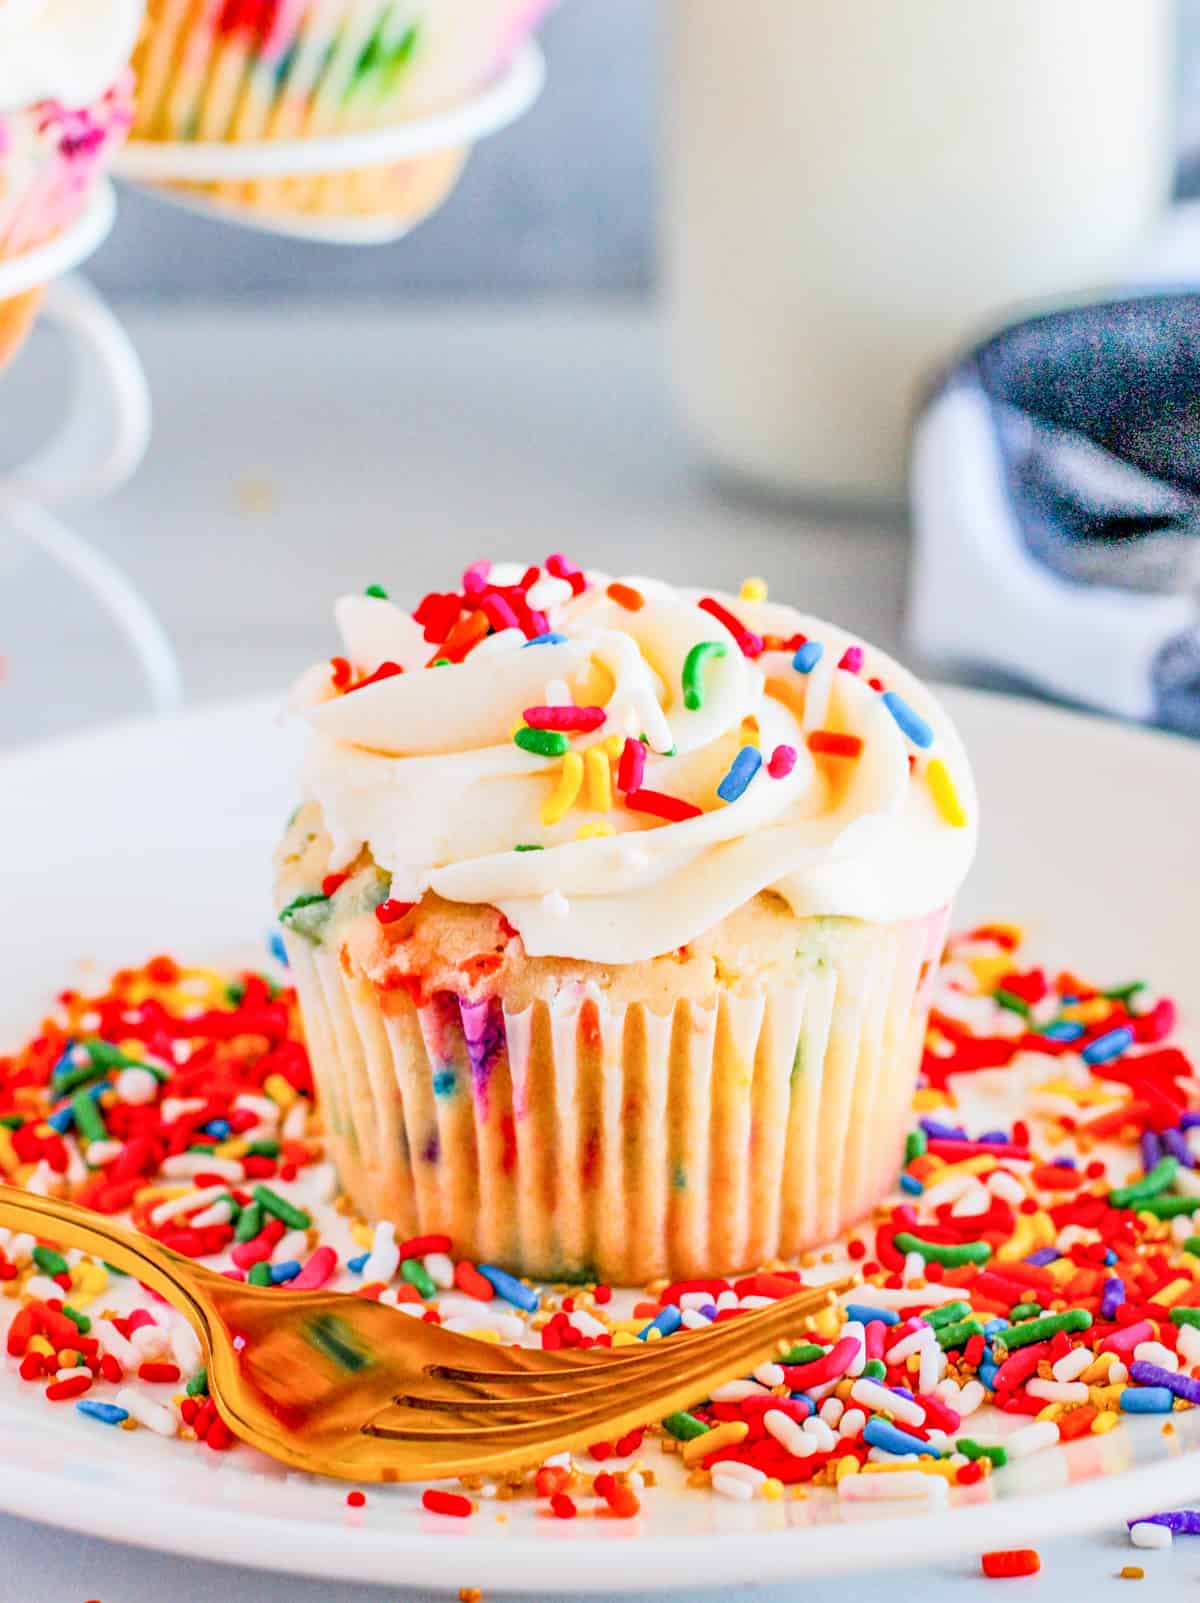 One of the Funfetti Cupcakes on a white plate with sprinkles and gold fork.